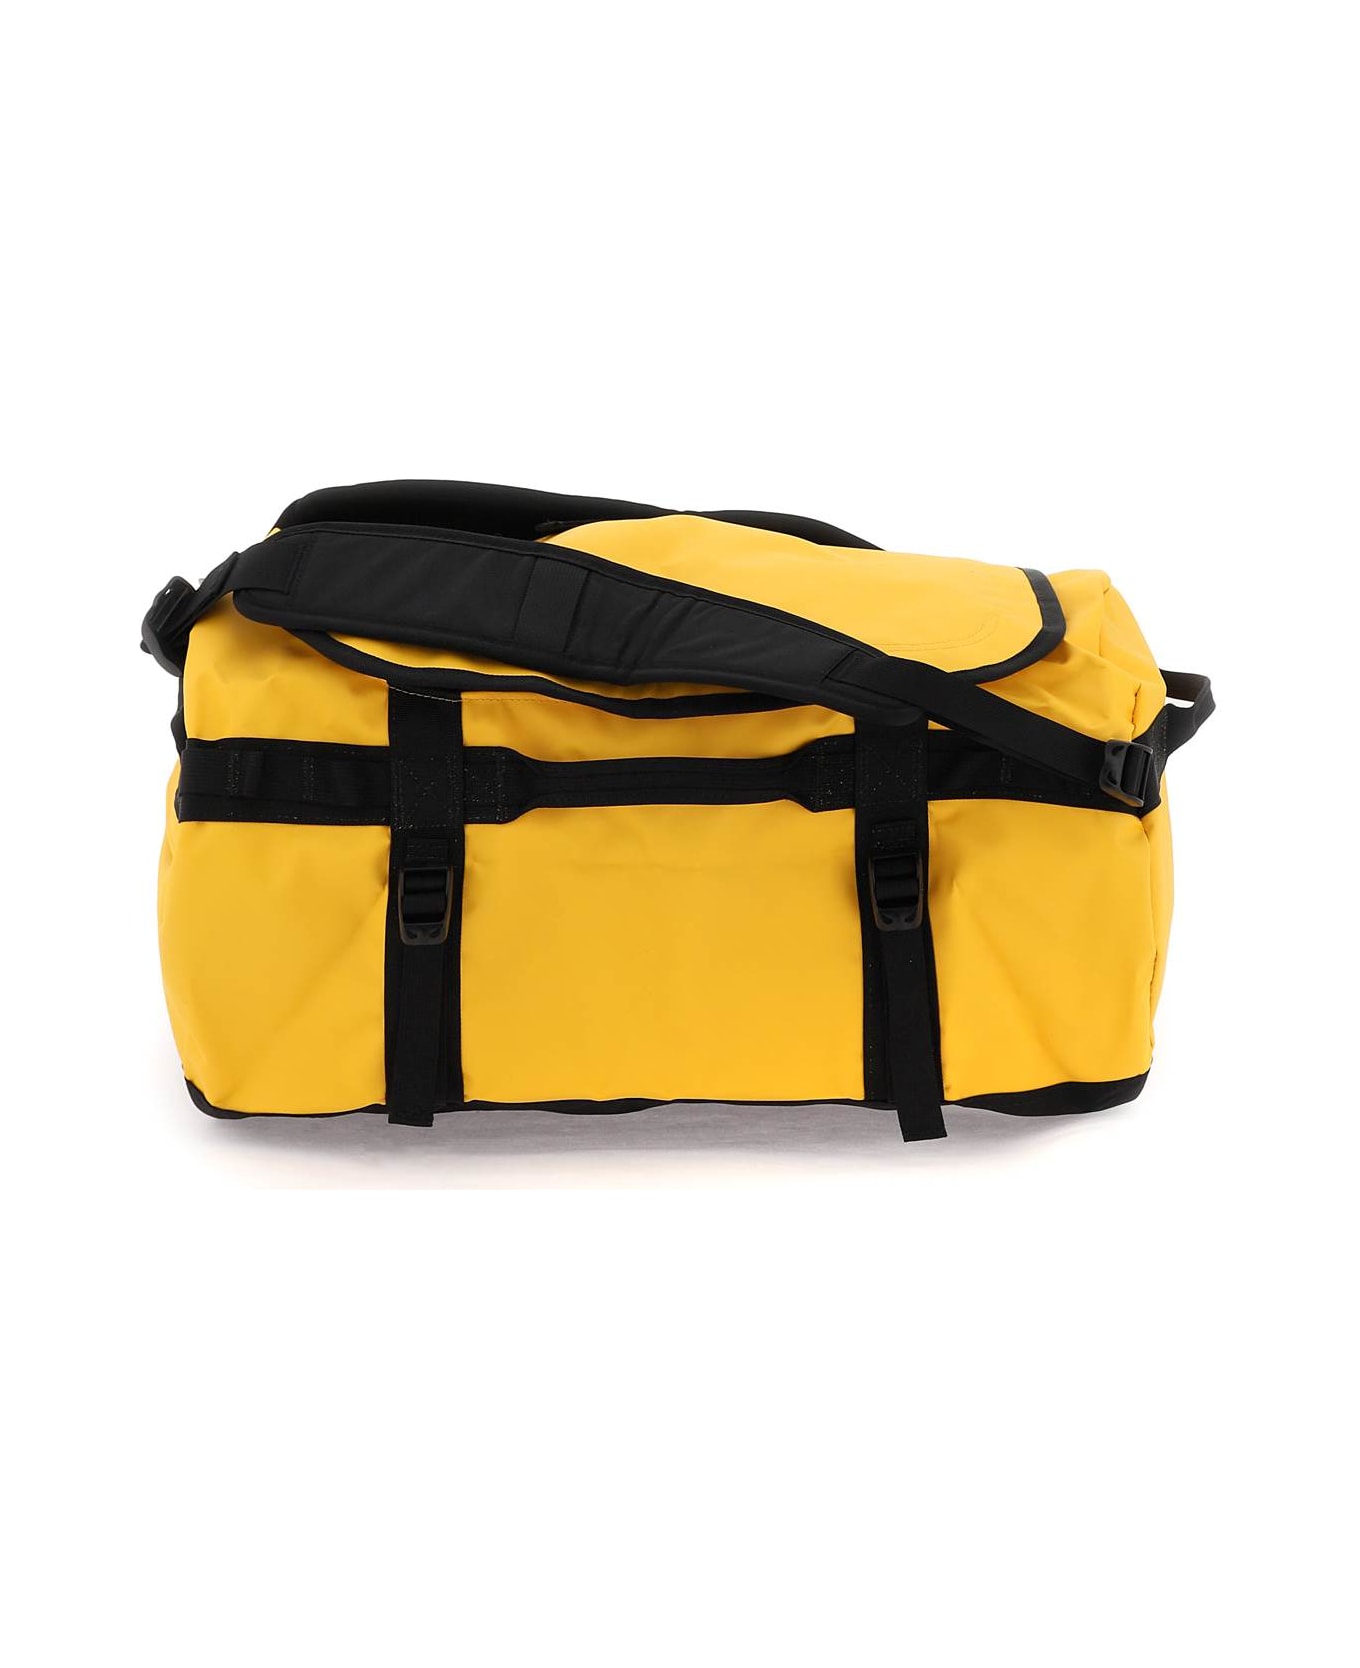 The North Face Small Base Camp Duffel Bag - SUMMIT GOLD TNF BLACK (Yellow)